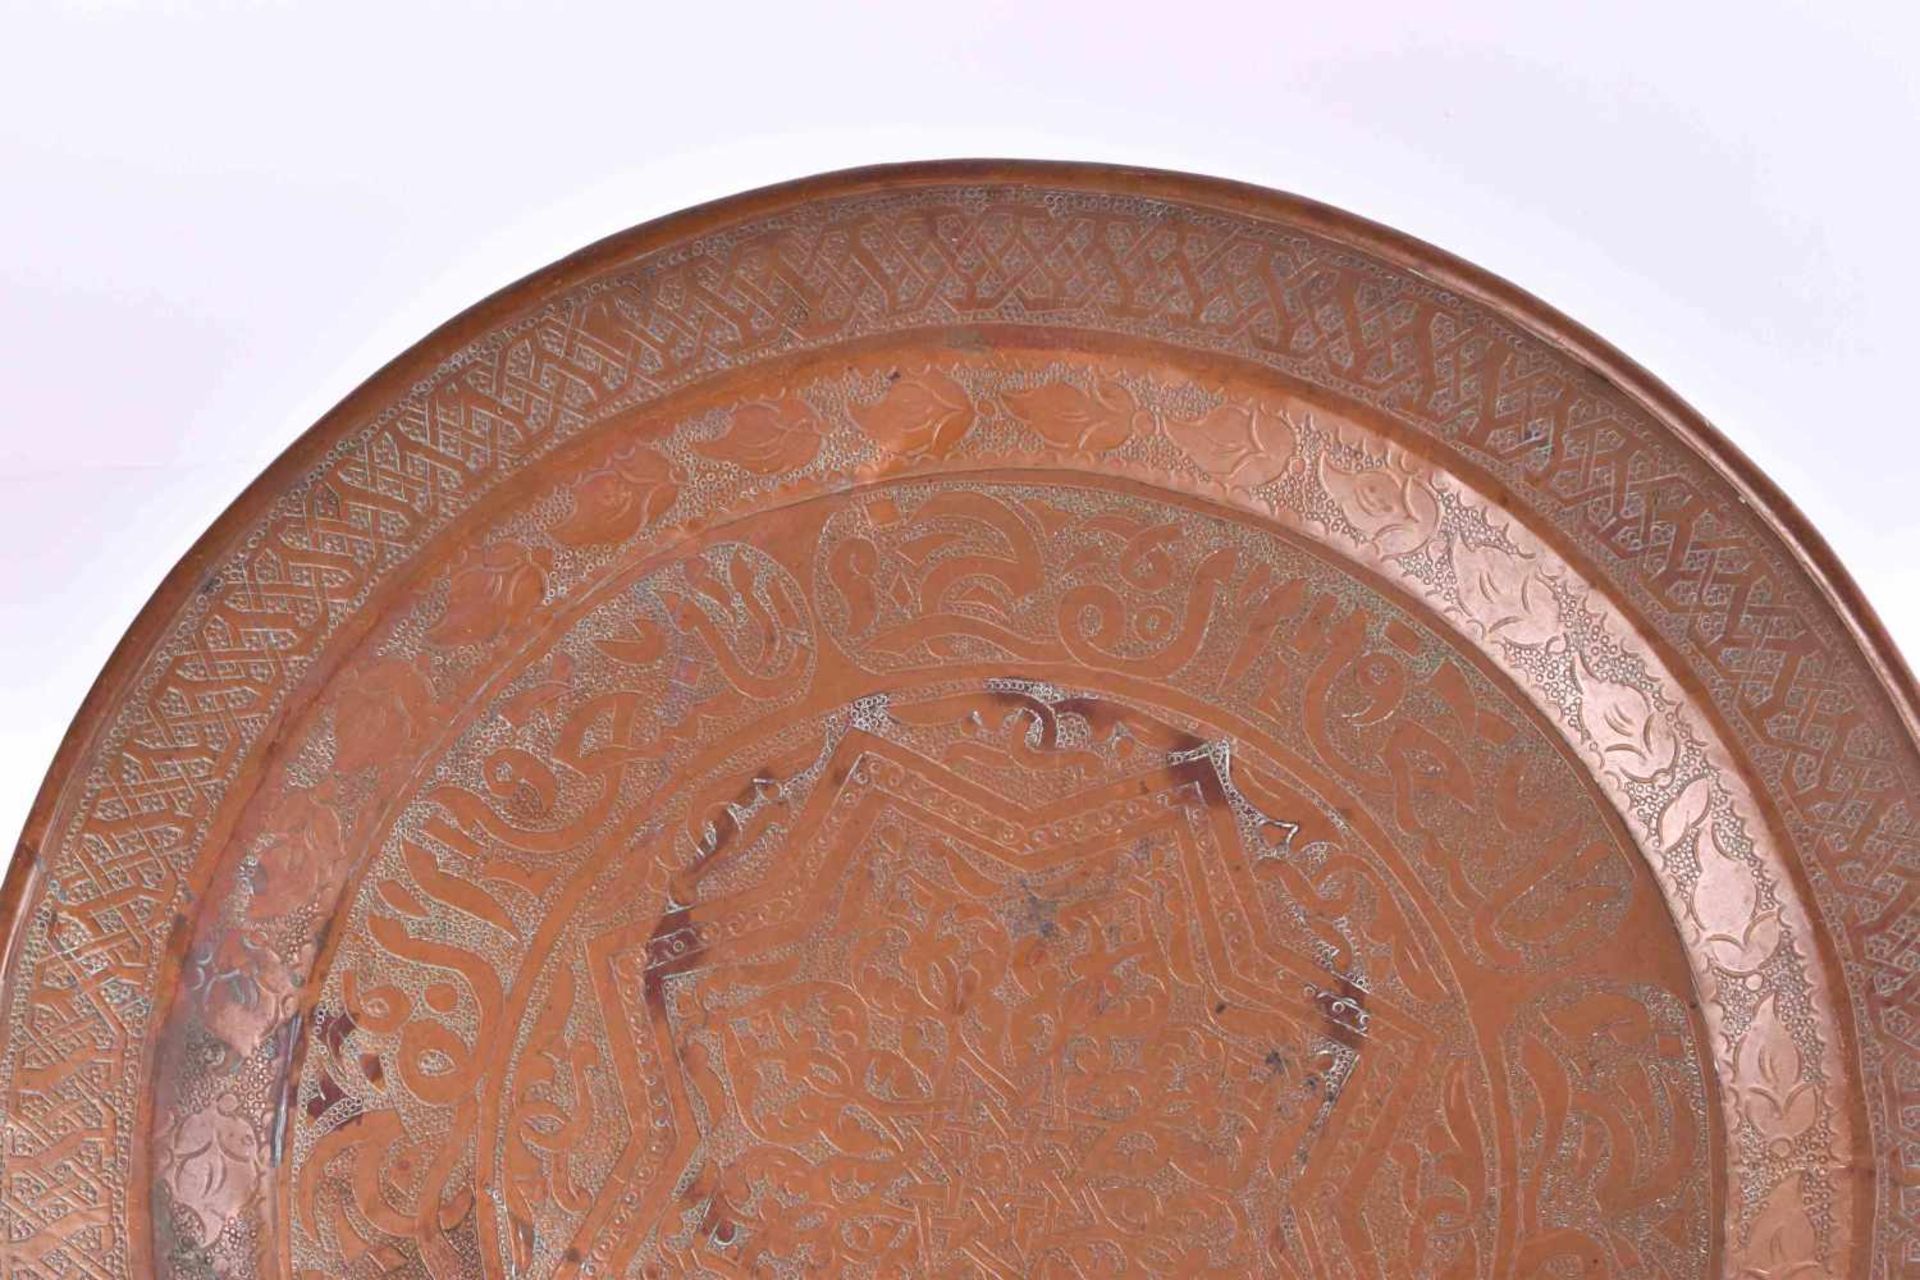 Plate Mameluk 19th centurycopper, finely chased with ornaments and calligraphy, Ø 47.5 cmTeller - Image 3 of 4